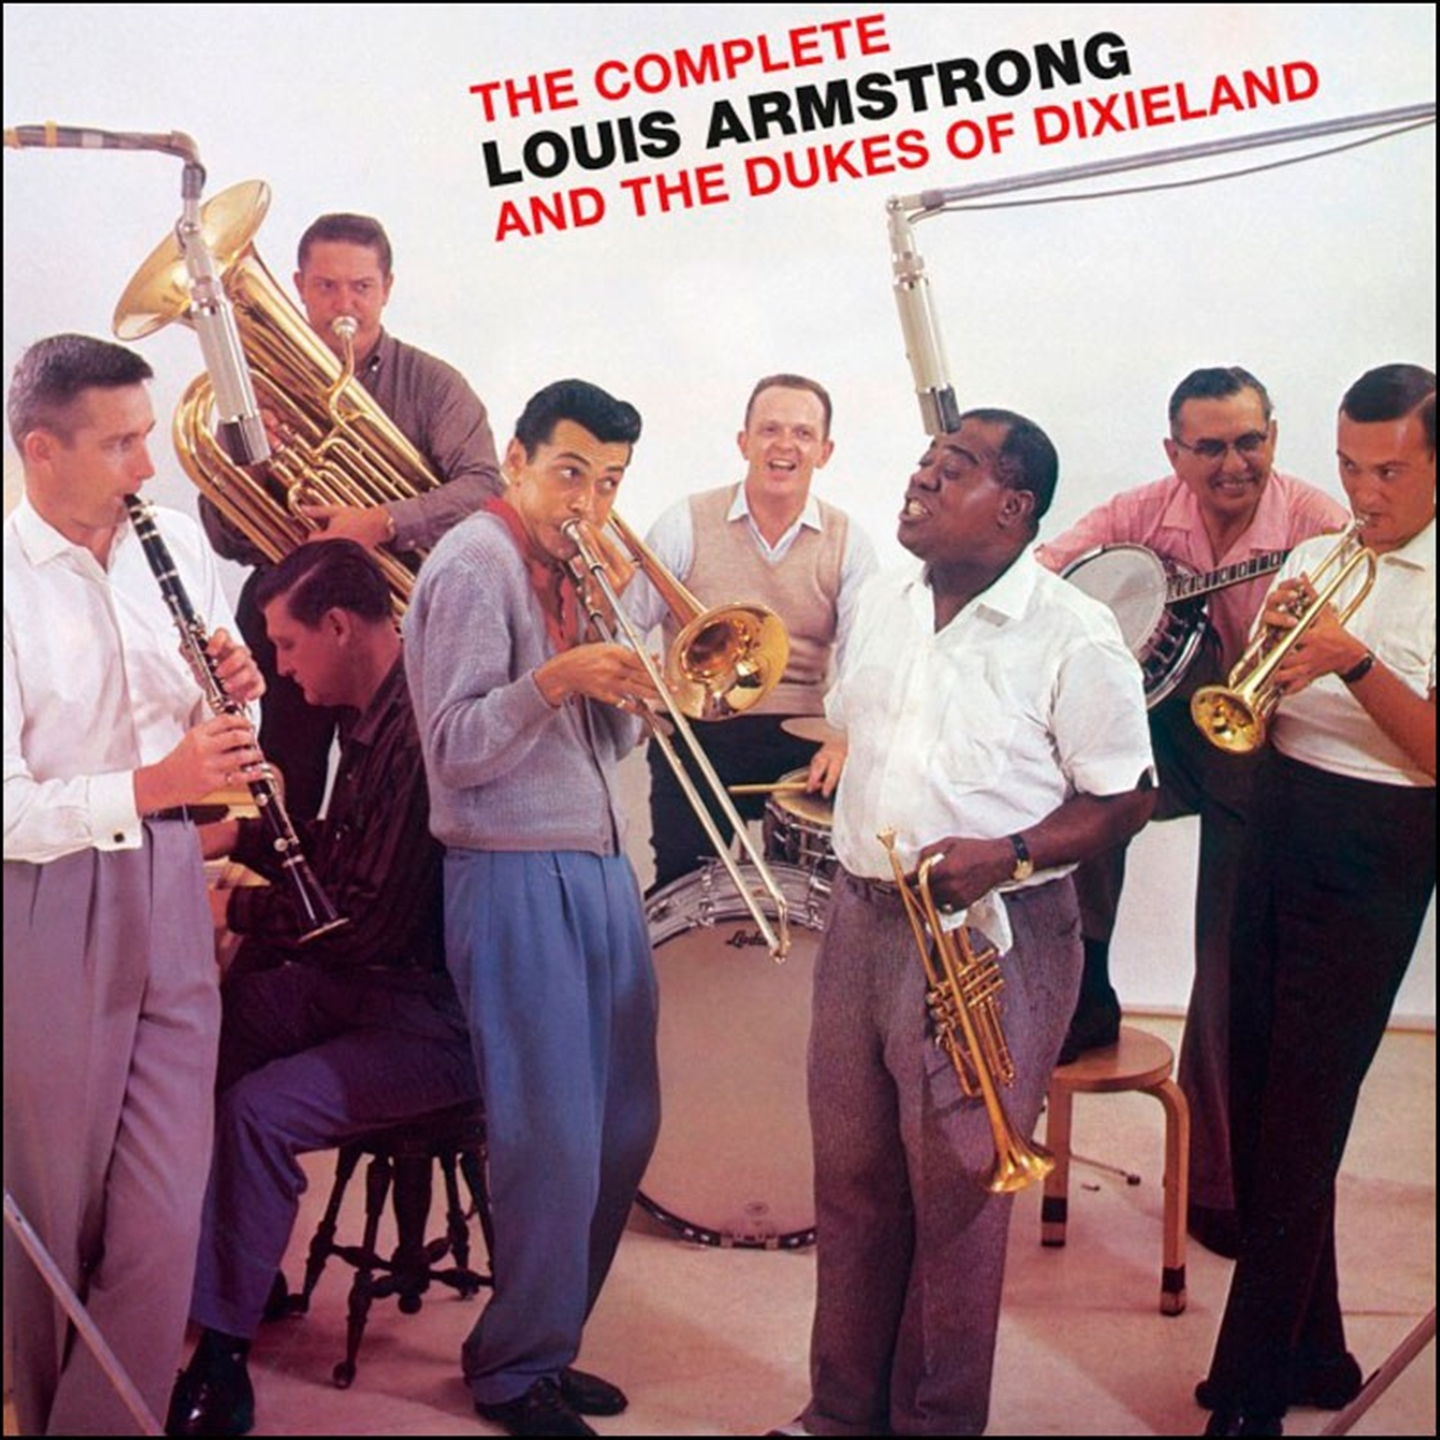 THE COMPLETE LOUIS ARMSTRONG AND THE DUKES OF DIXIELAND [3 CD]